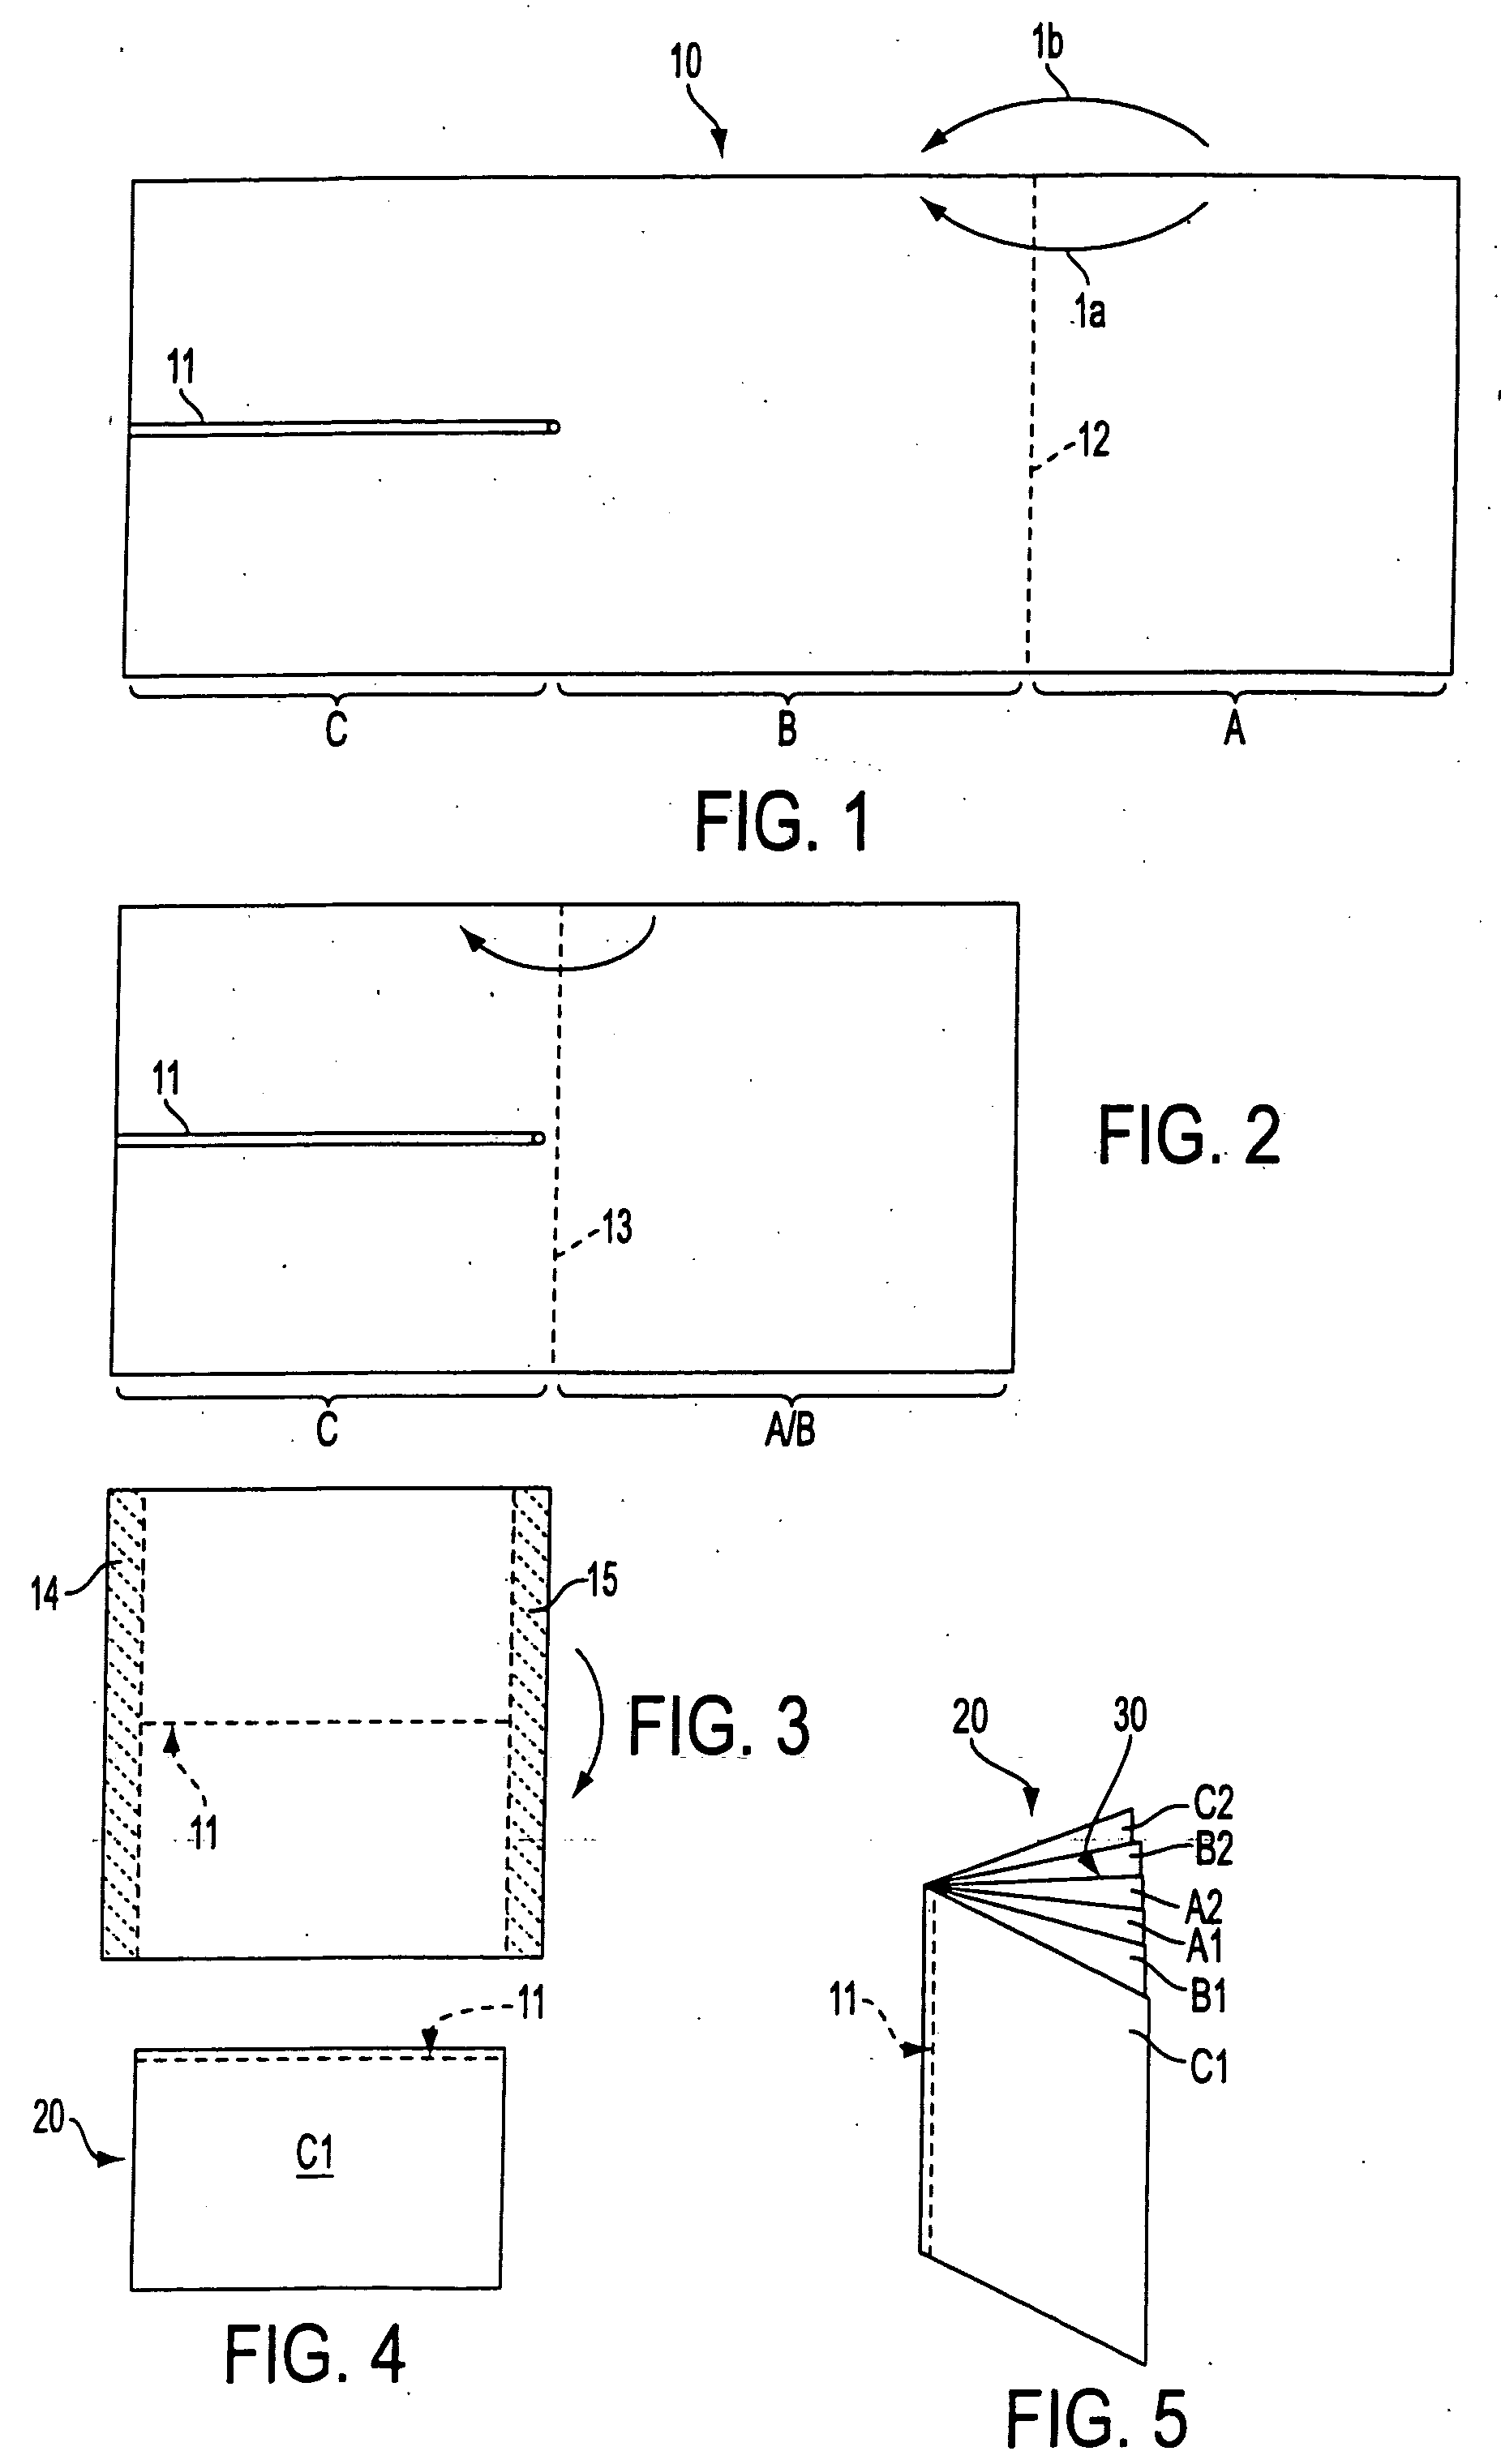 Method of manufacturing a single booklet